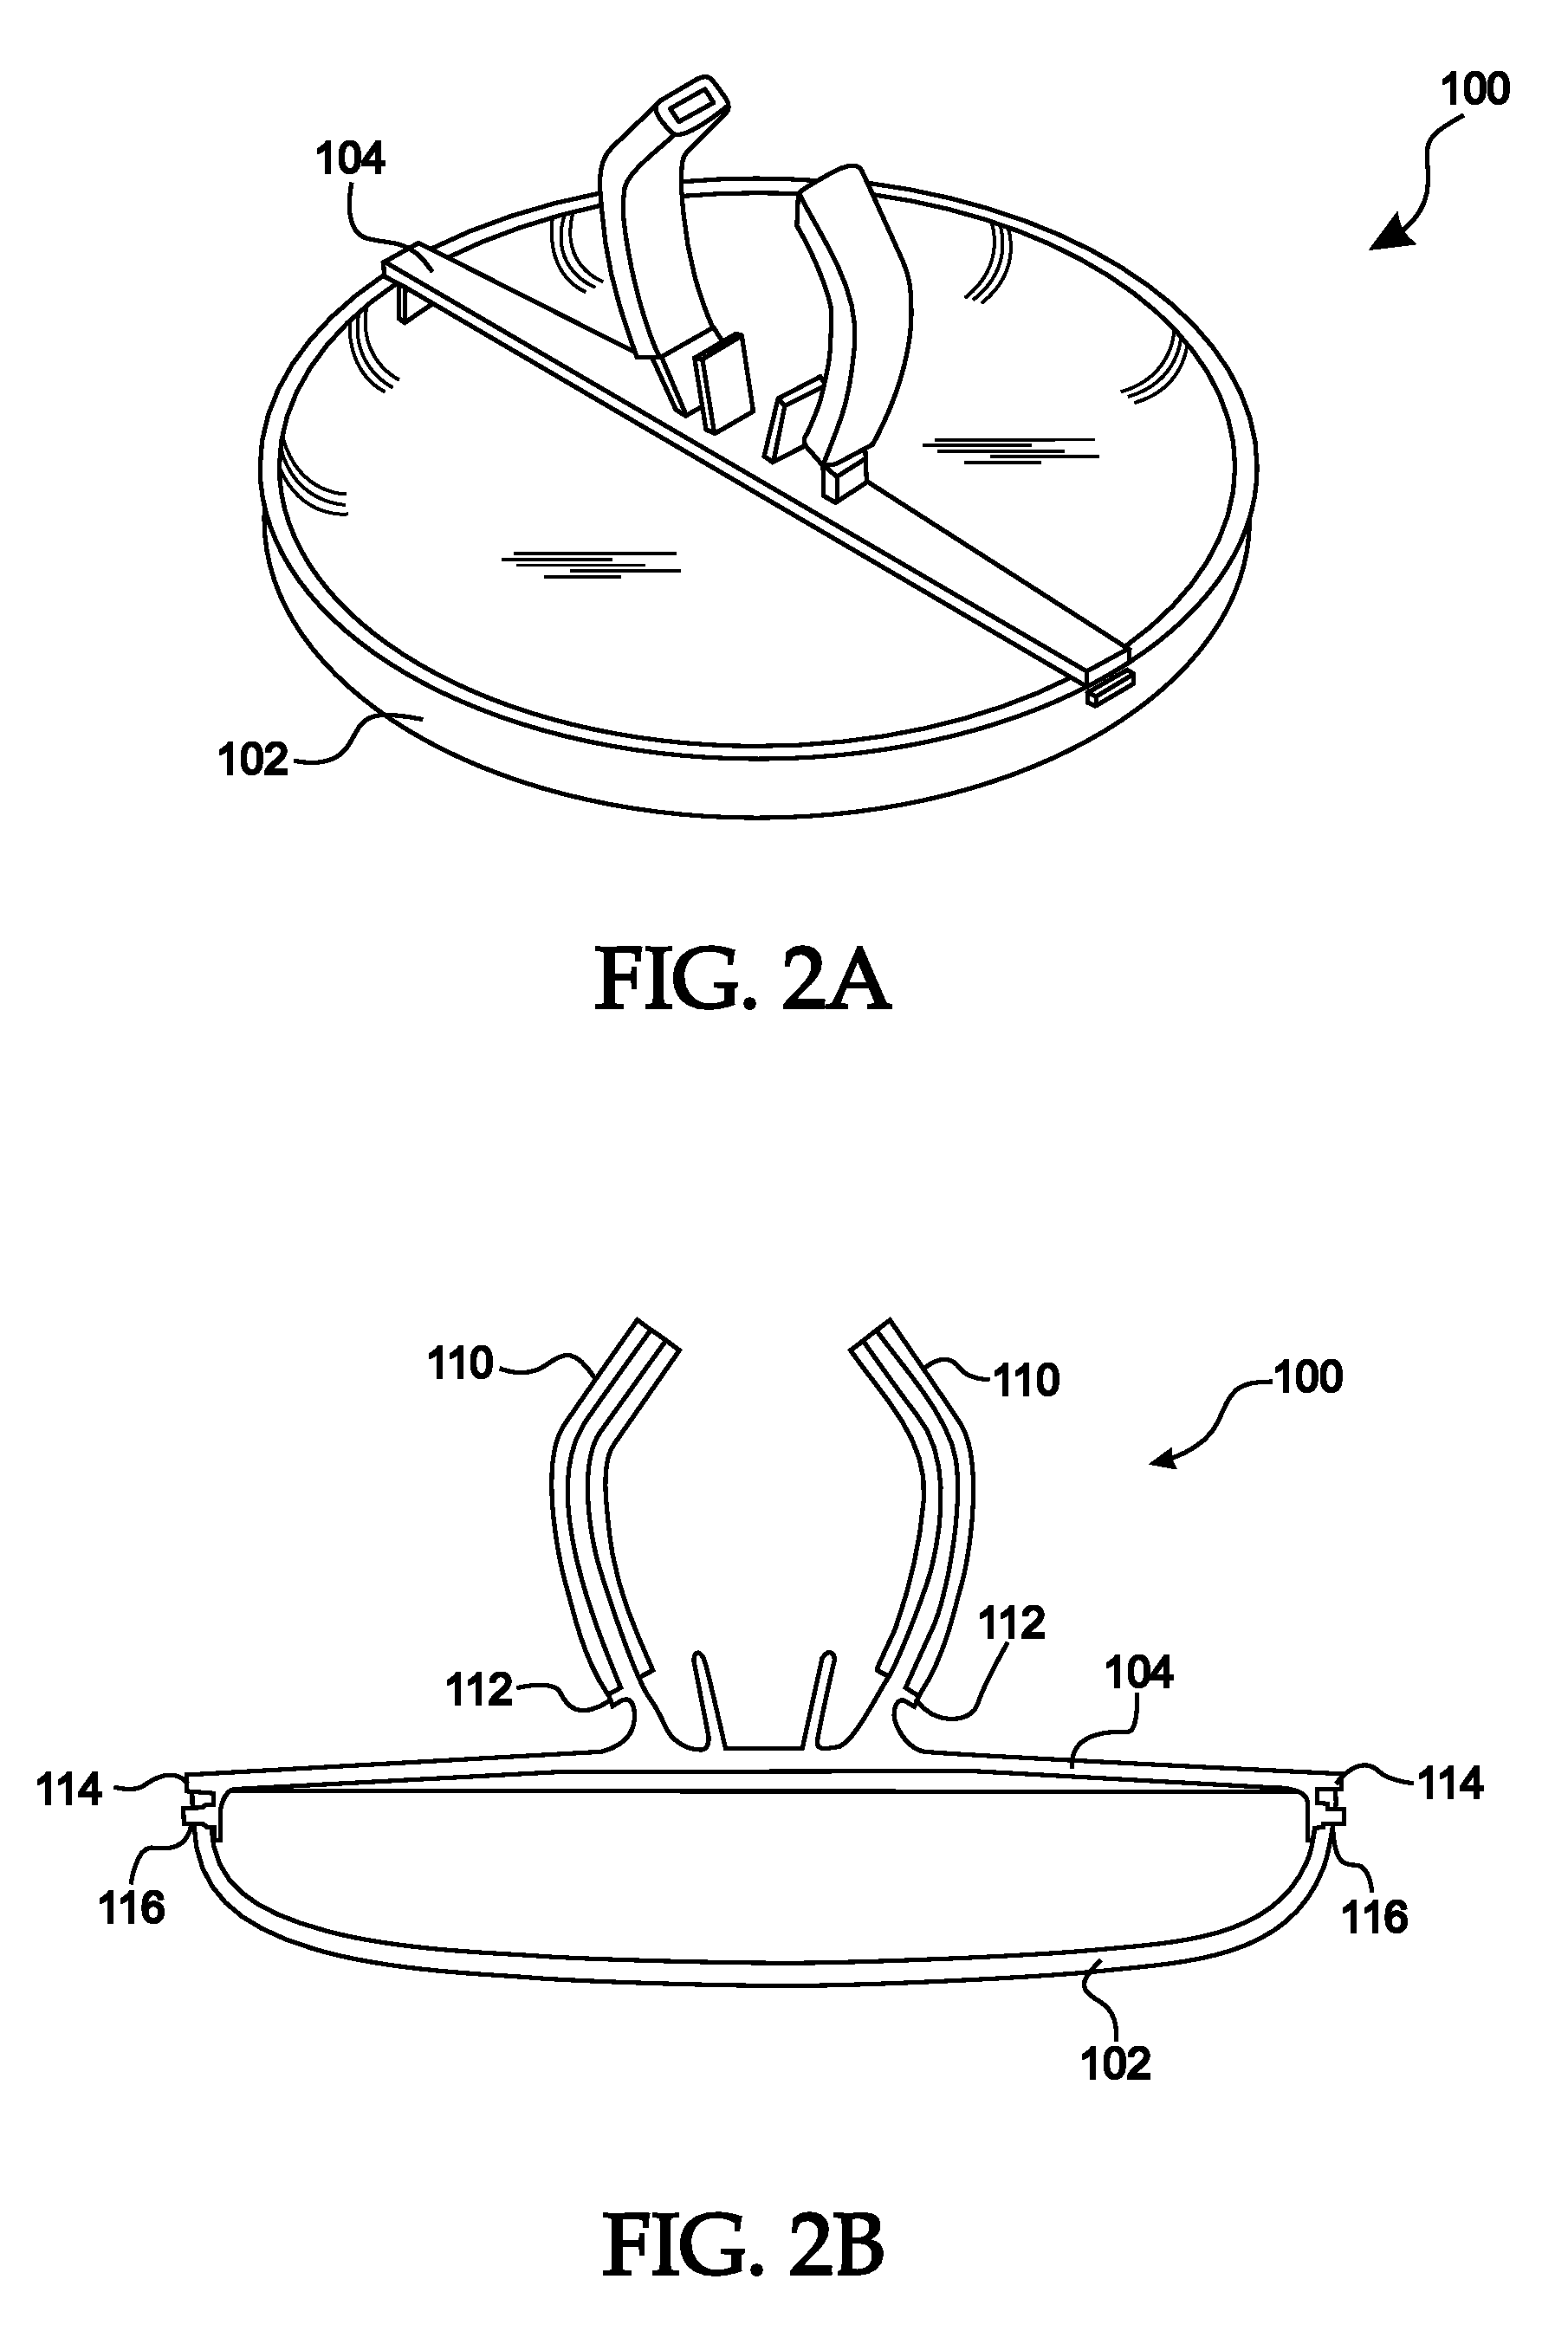 Cover device for compact flourescent lamps